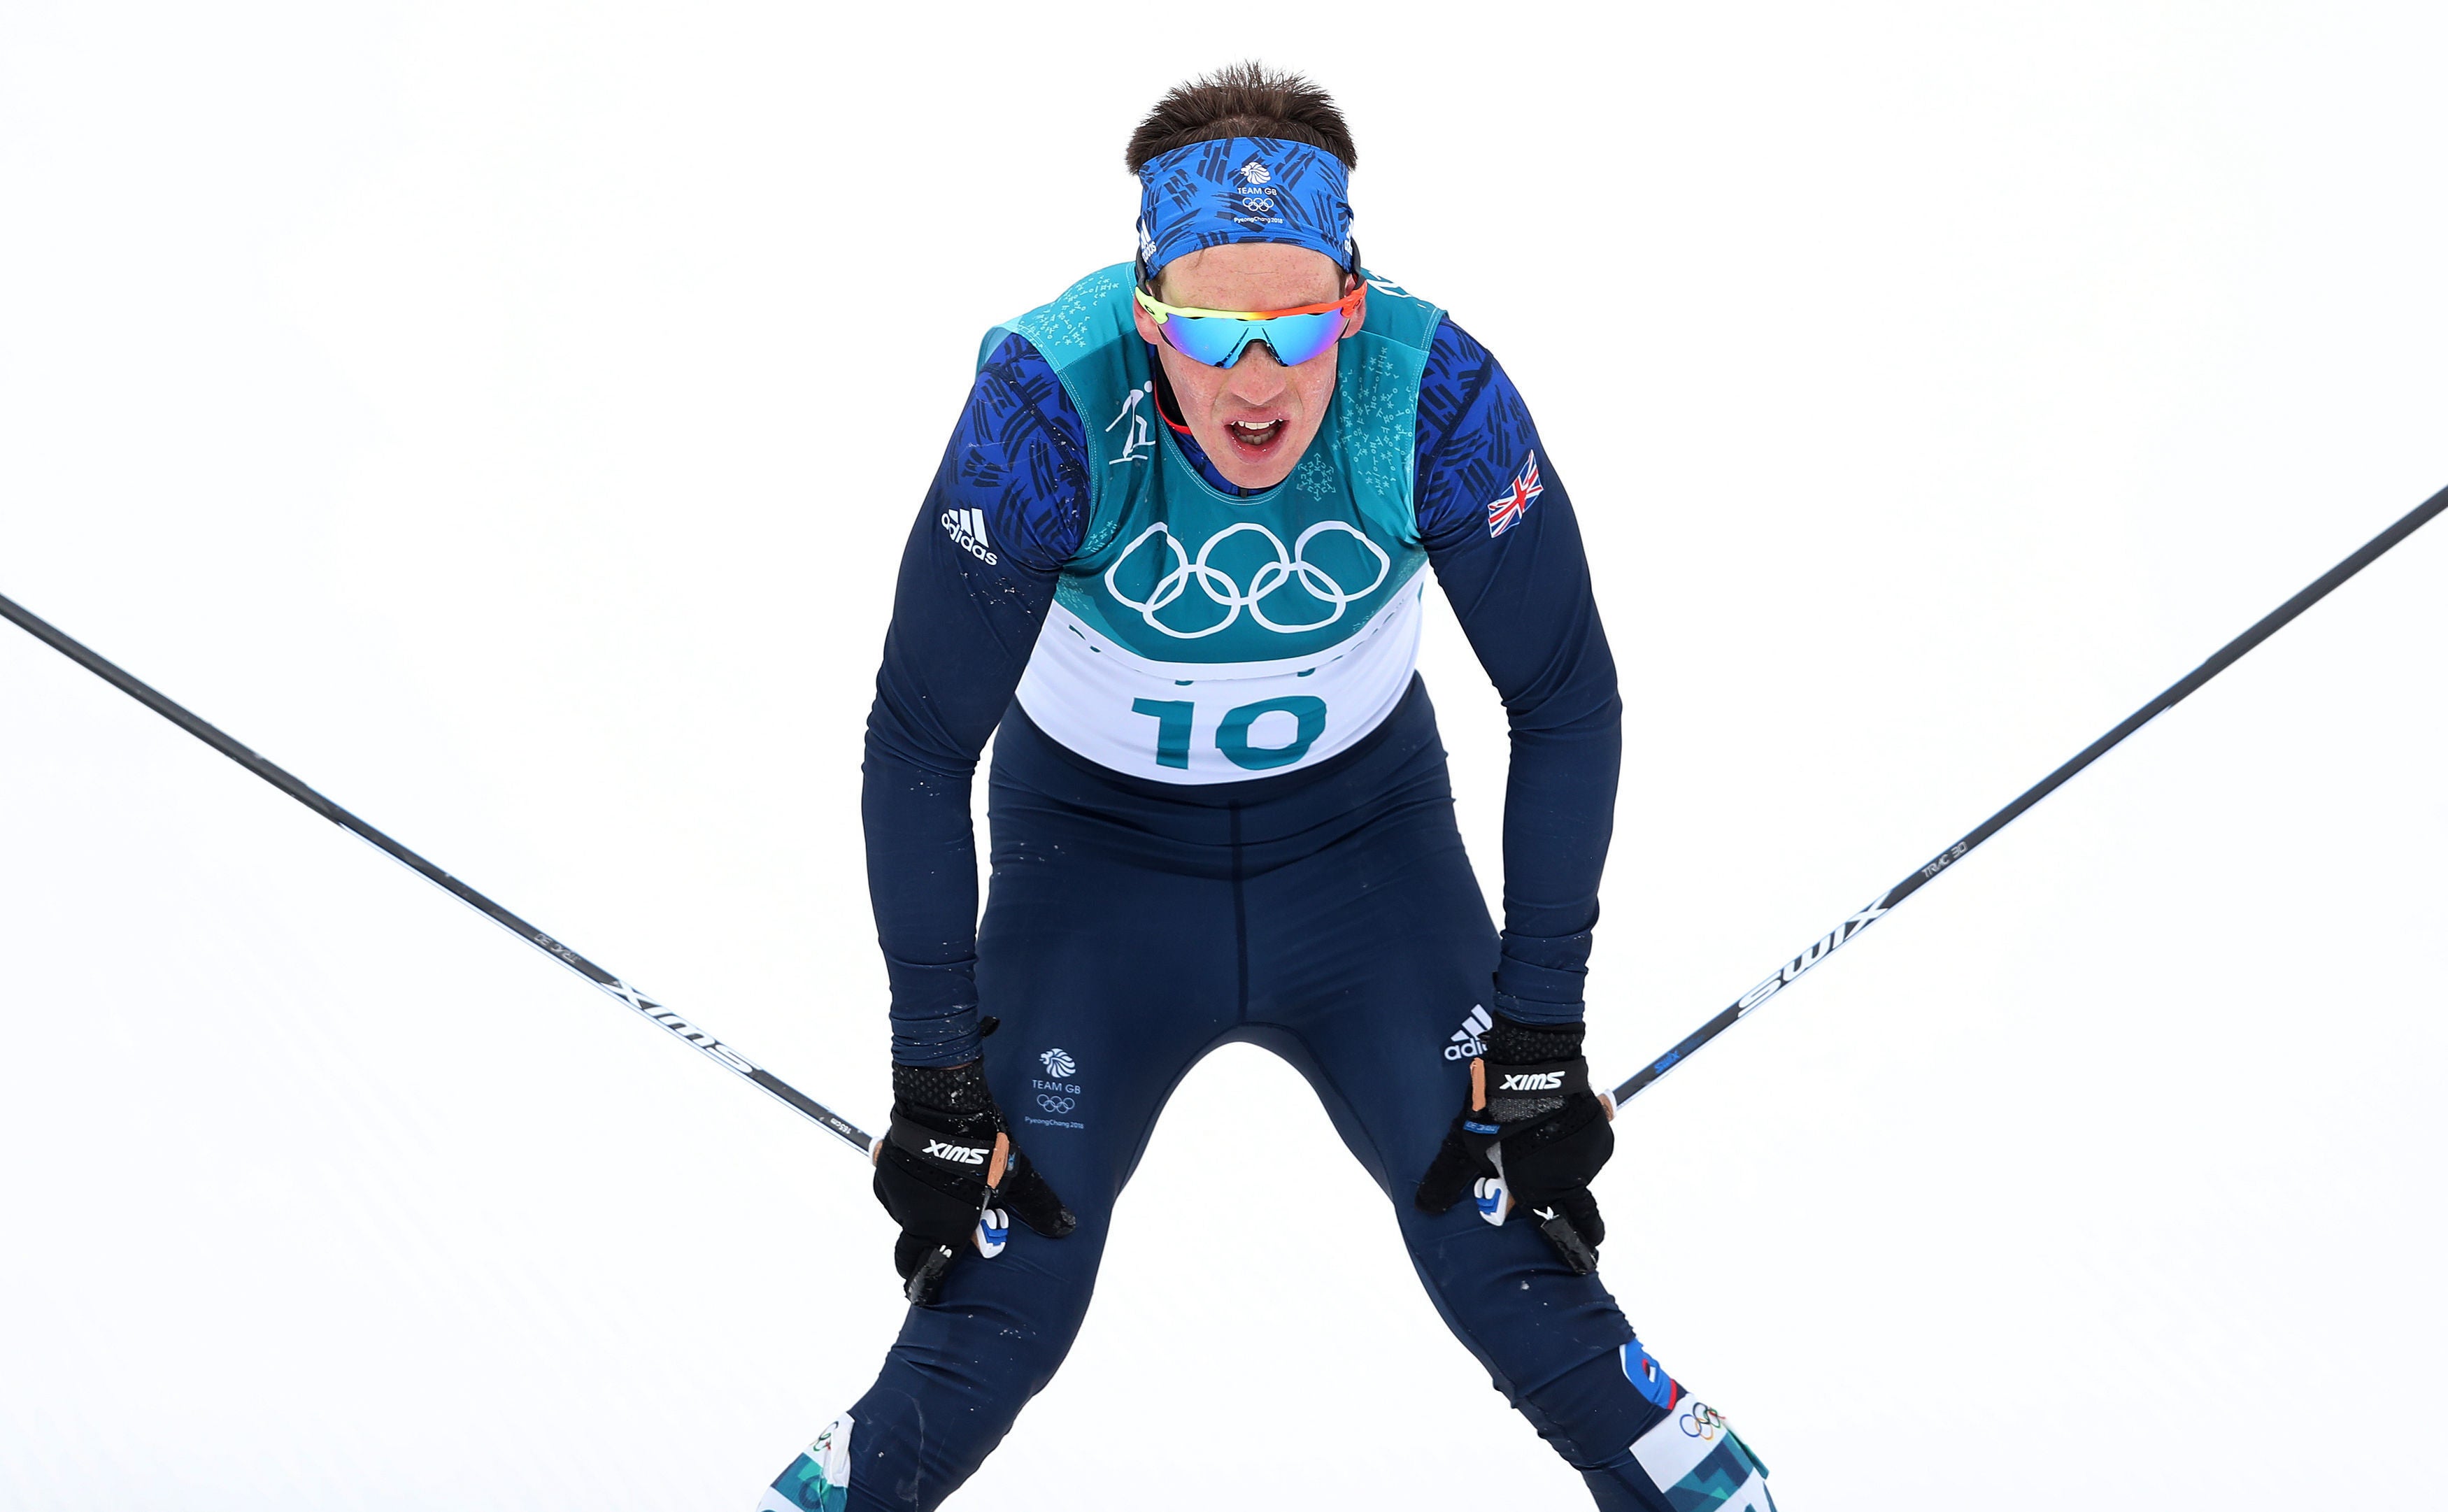 Andrew Musgrave finished seventh in the men’s skiathlon in Pyeongchang (David Davies/PA)